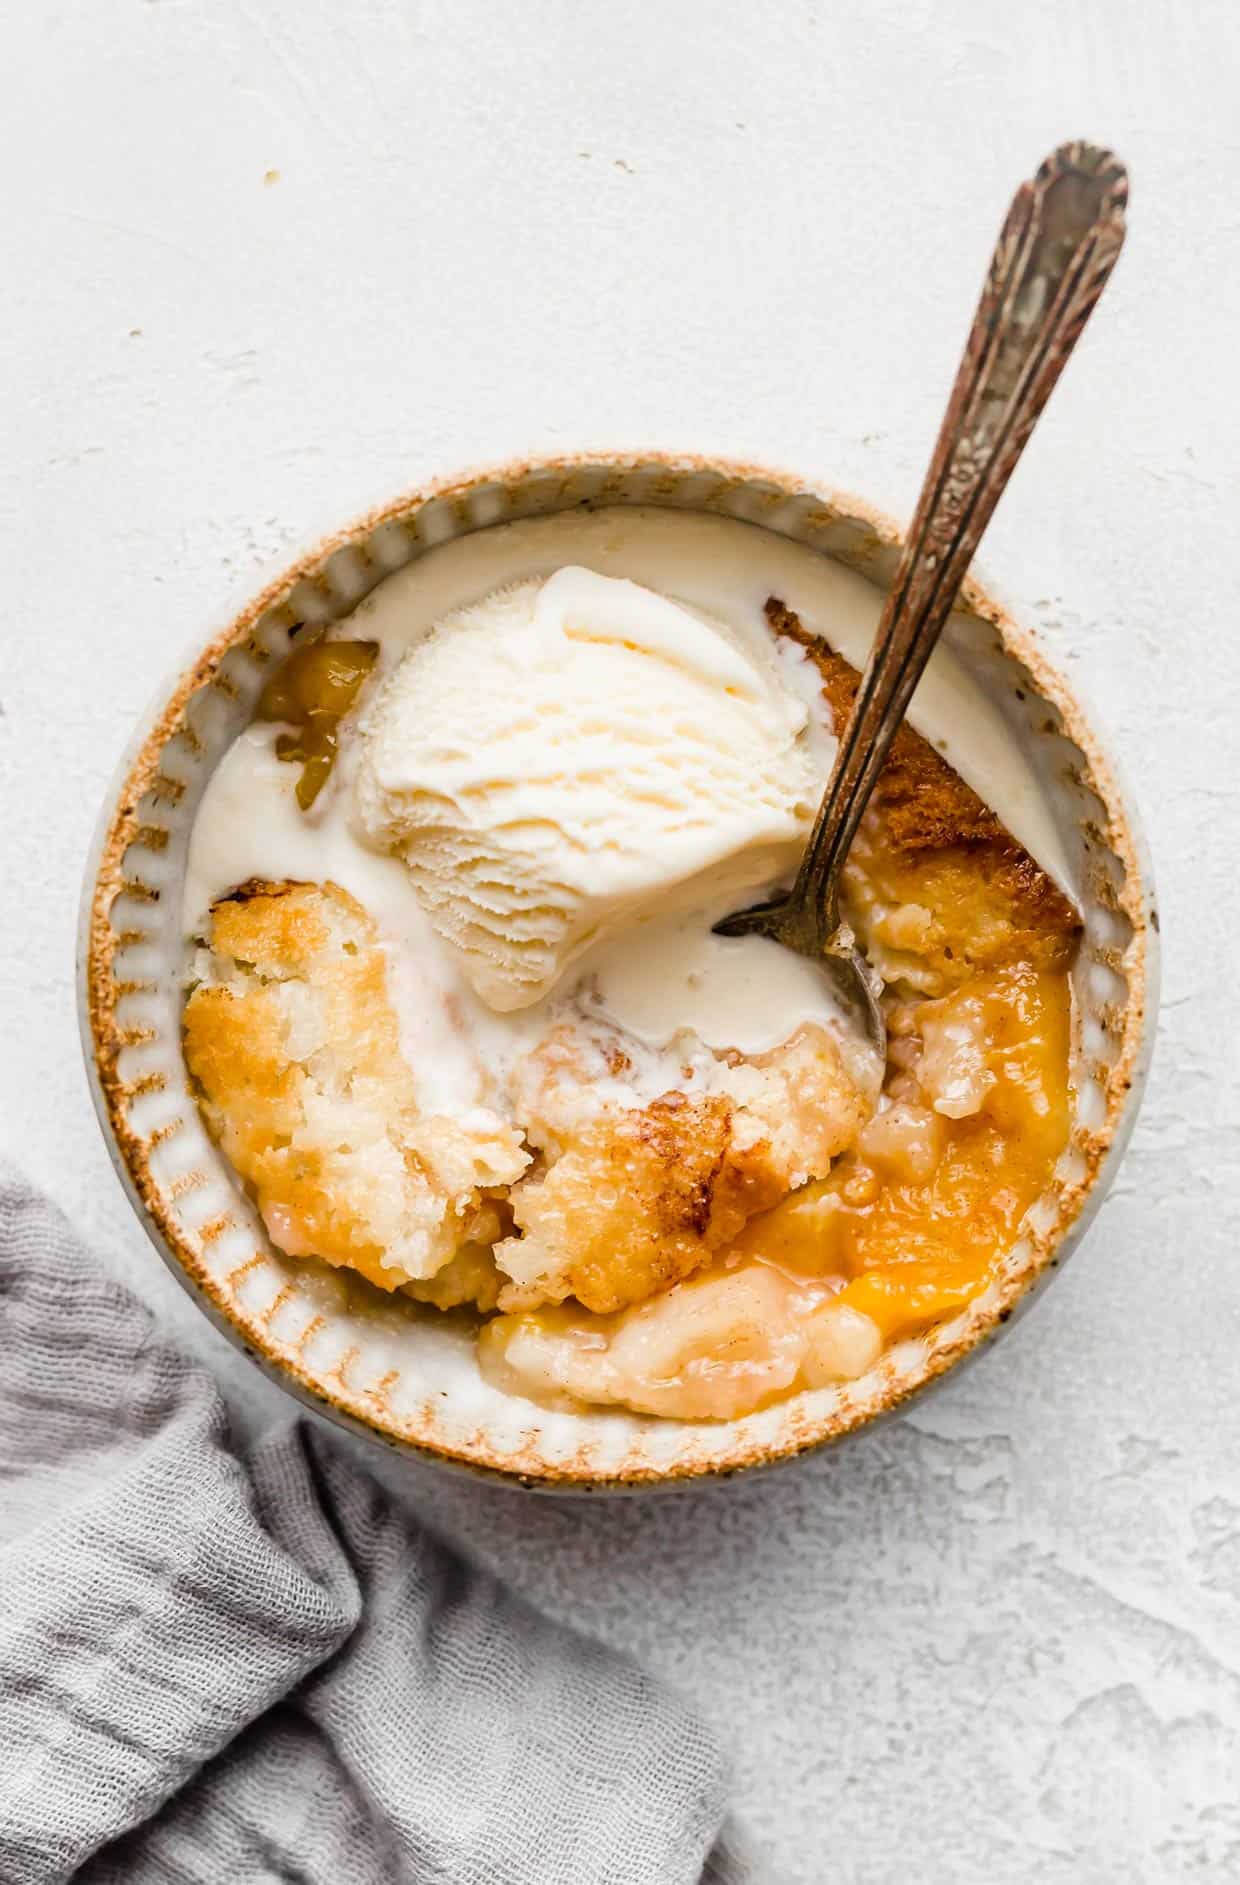 Old Fashioned Peach Cobbler recipe in a tan bowl with melted vanilla ice cream overtop.